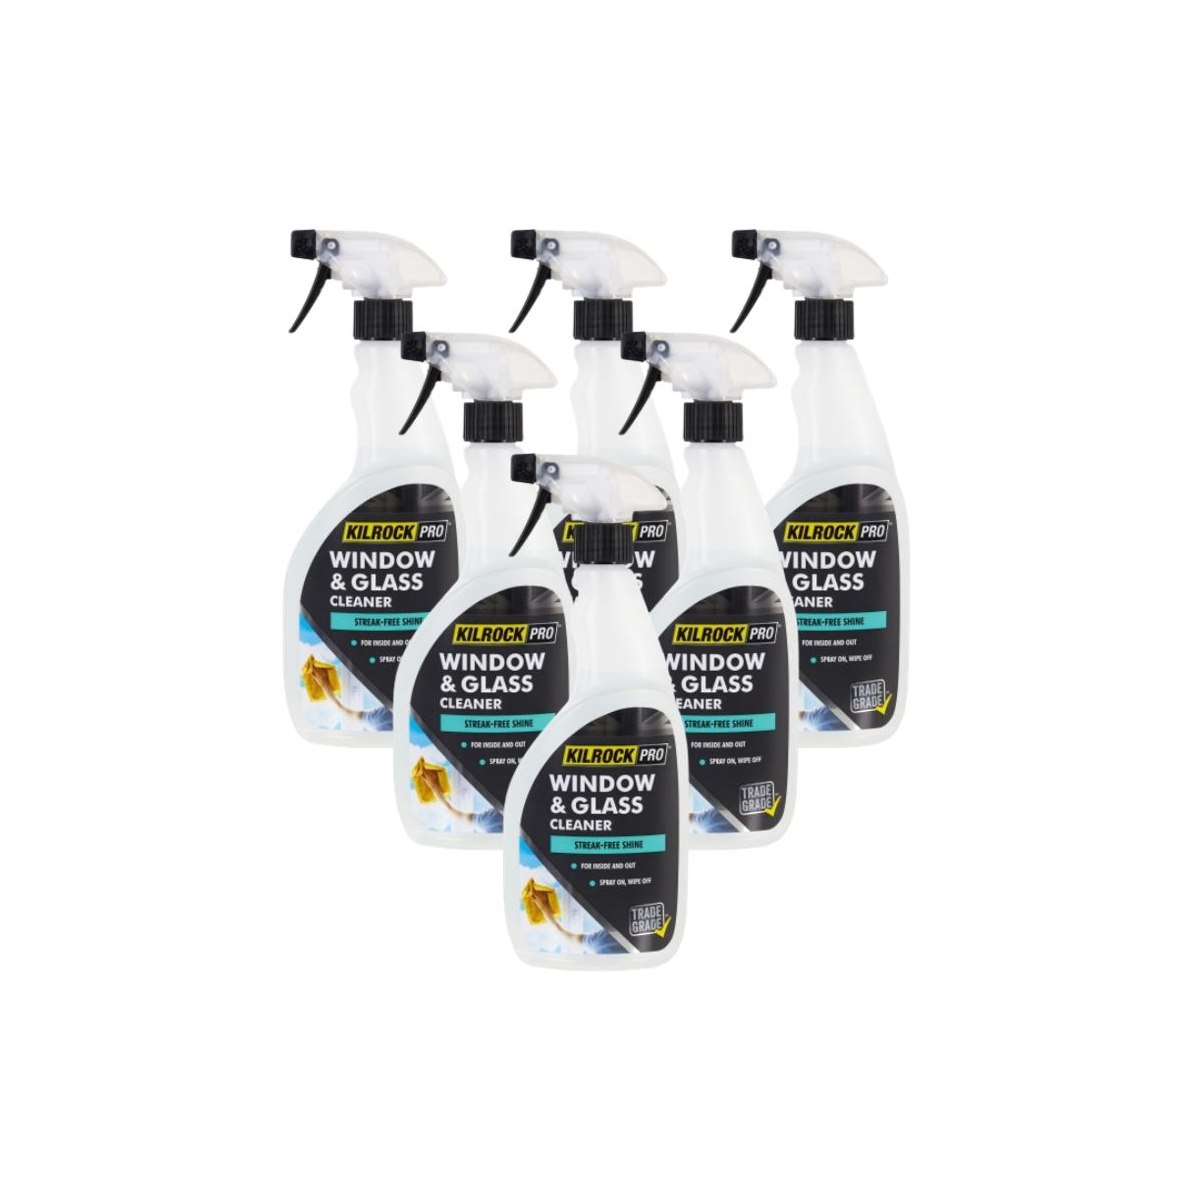 Case of 6 x Kilrock Pro Window and Glass Cleaner 750ml